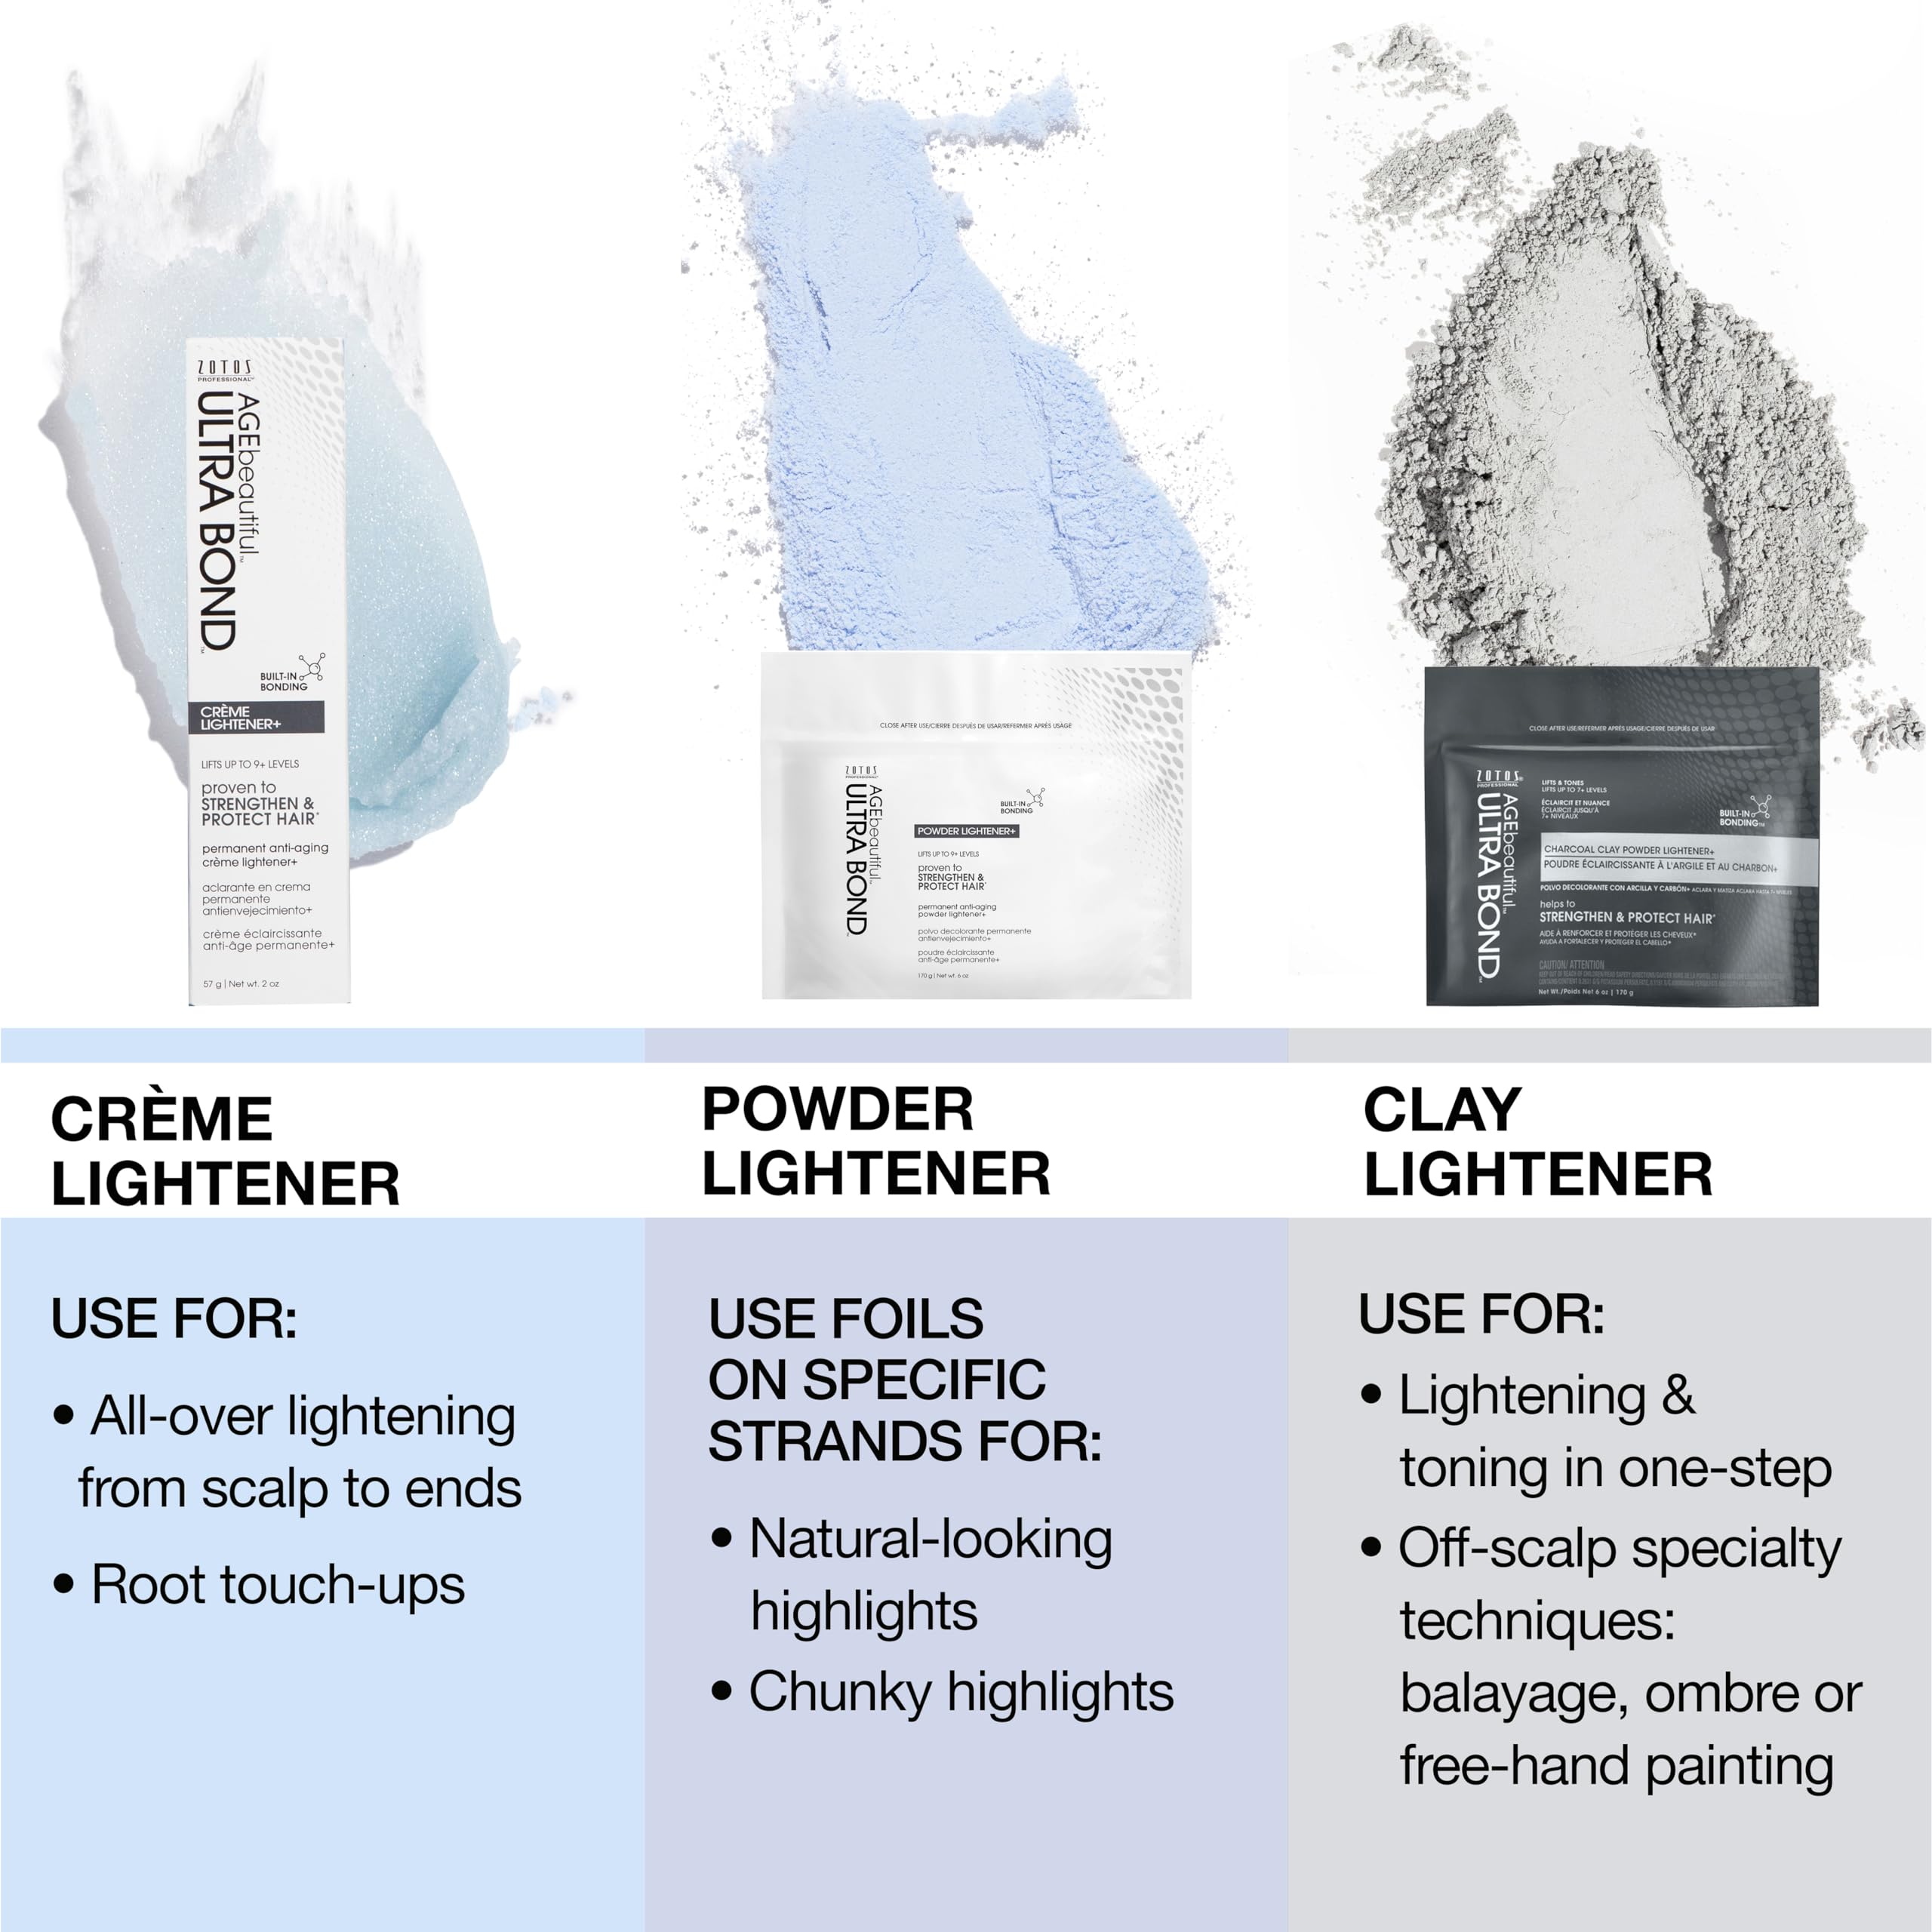 ULTRA BOND Charcoal Clay Powder Lightener with Built-in Bonding | Strengthens & Protects for Stronger & Shinier Hair | Lightens & Tones in One-Step